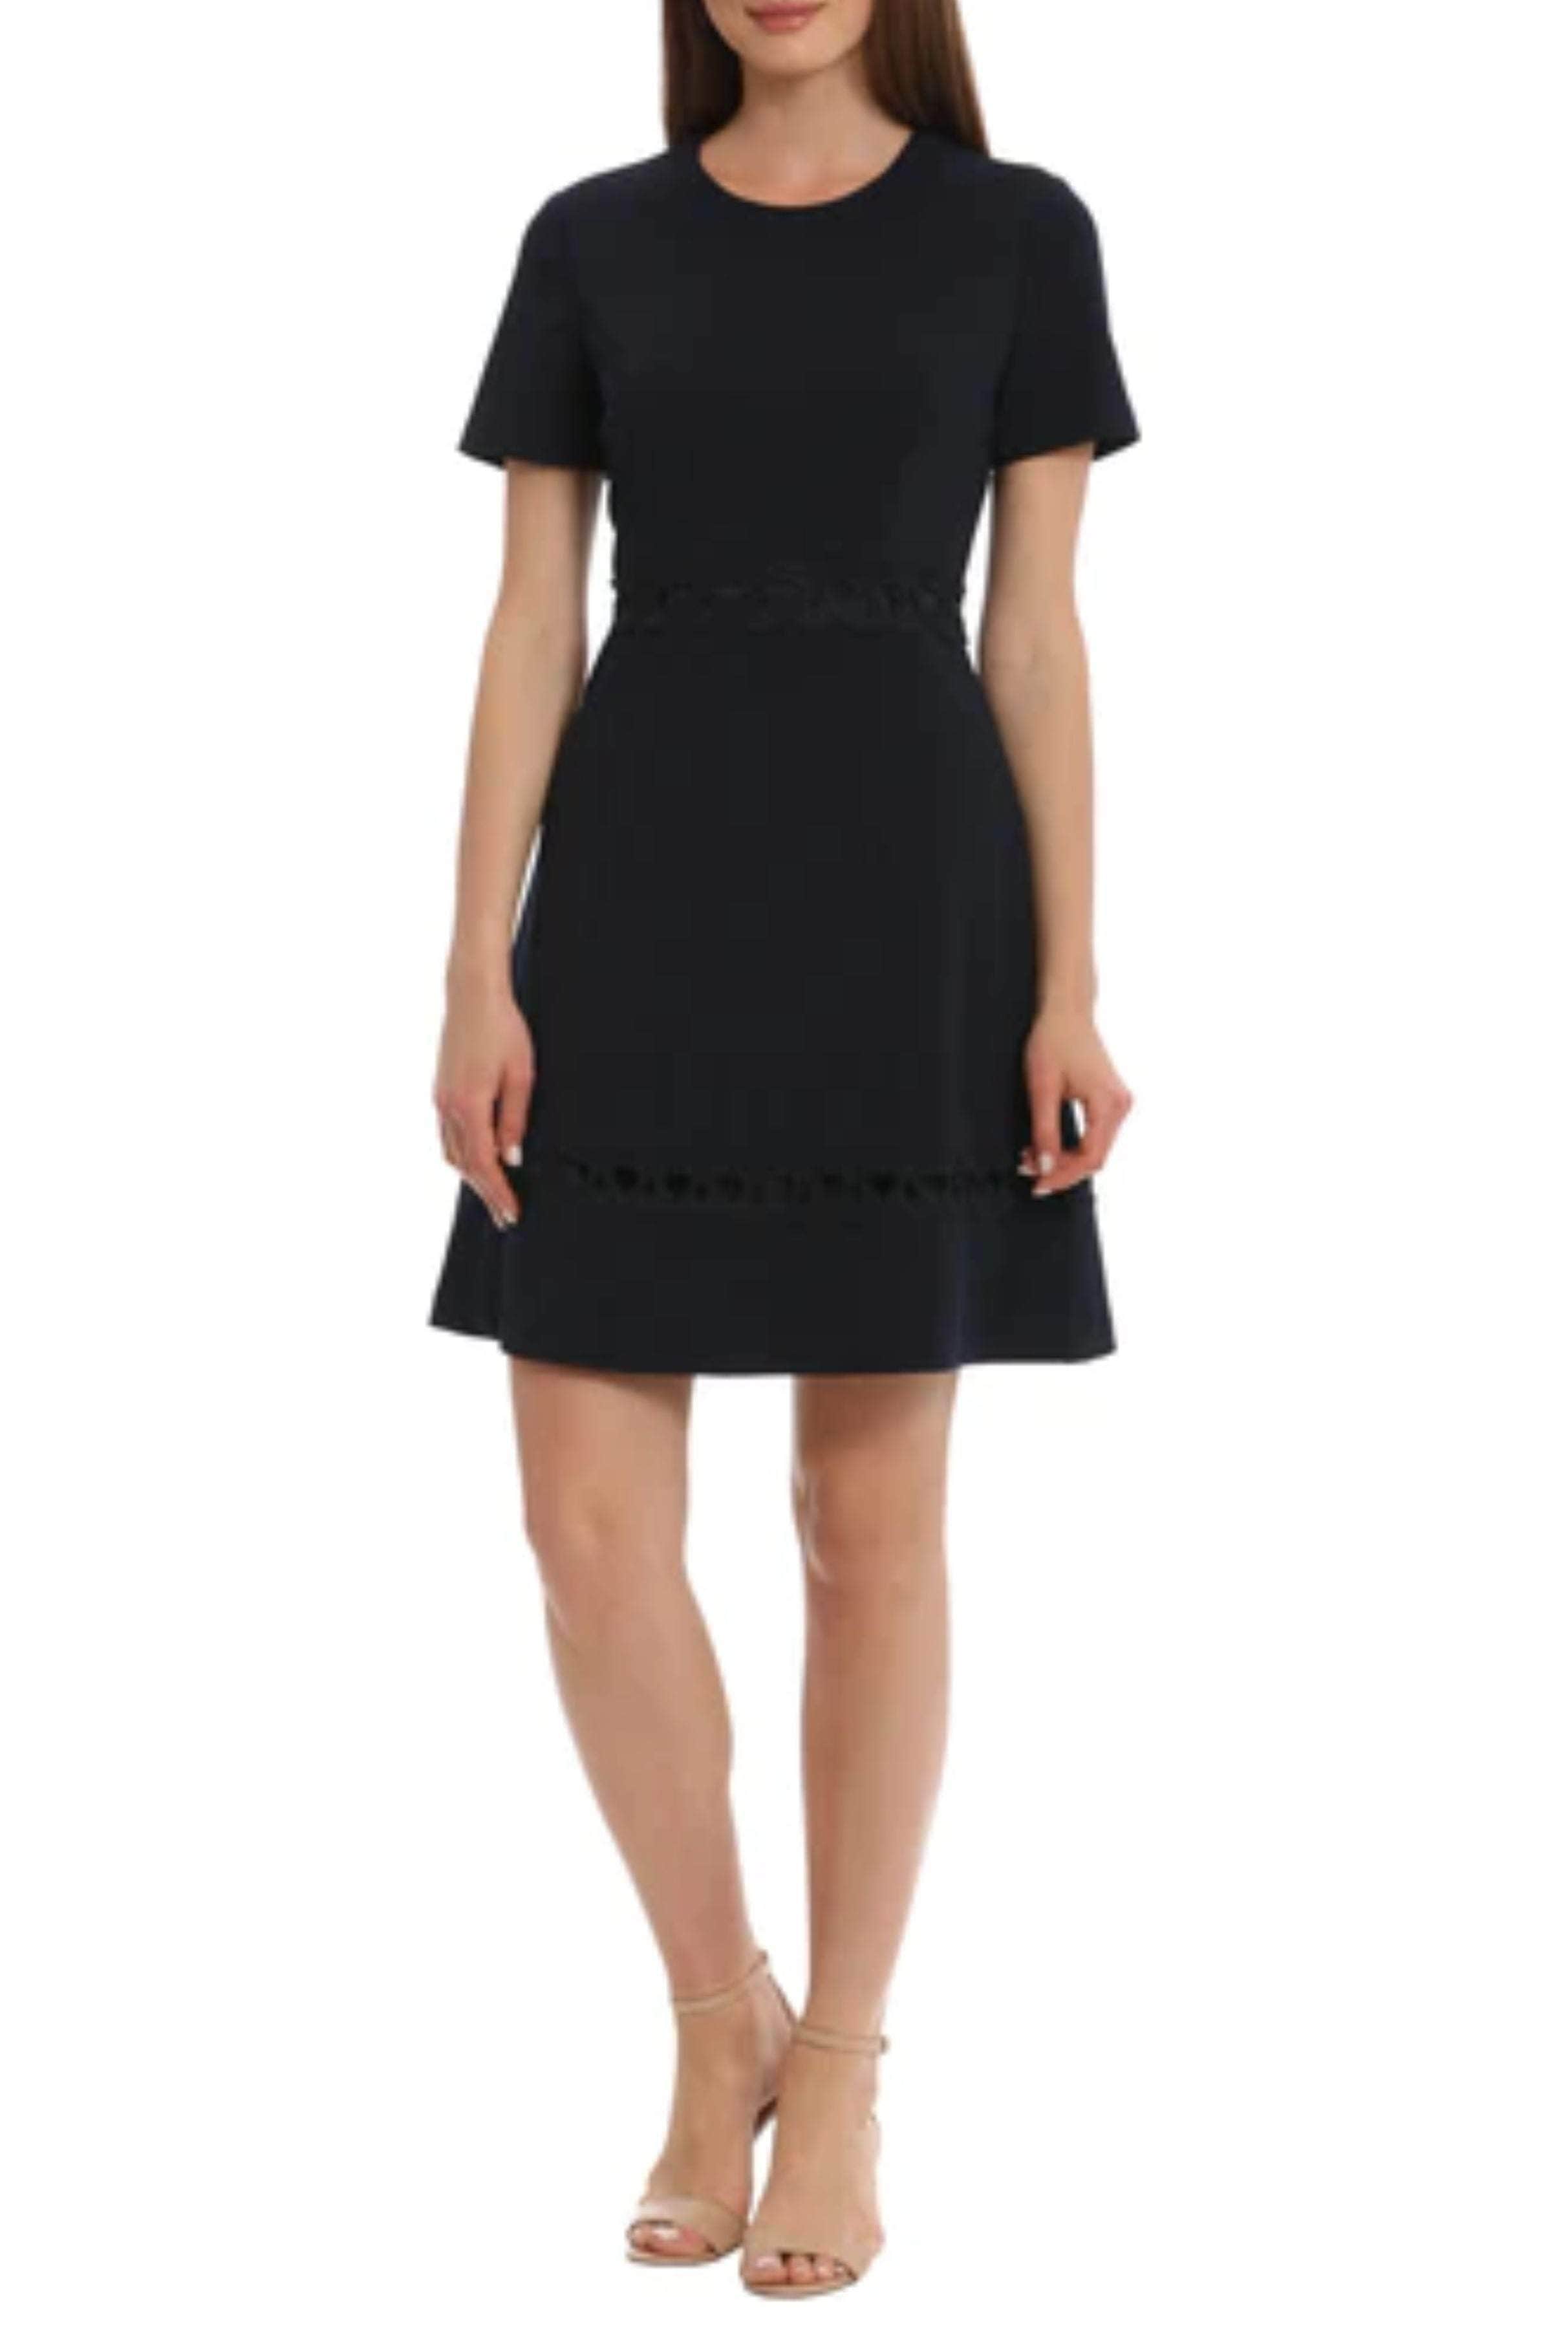 Image of Maggy London G5714M - Short Sleeve A-Line Cocktail Dress